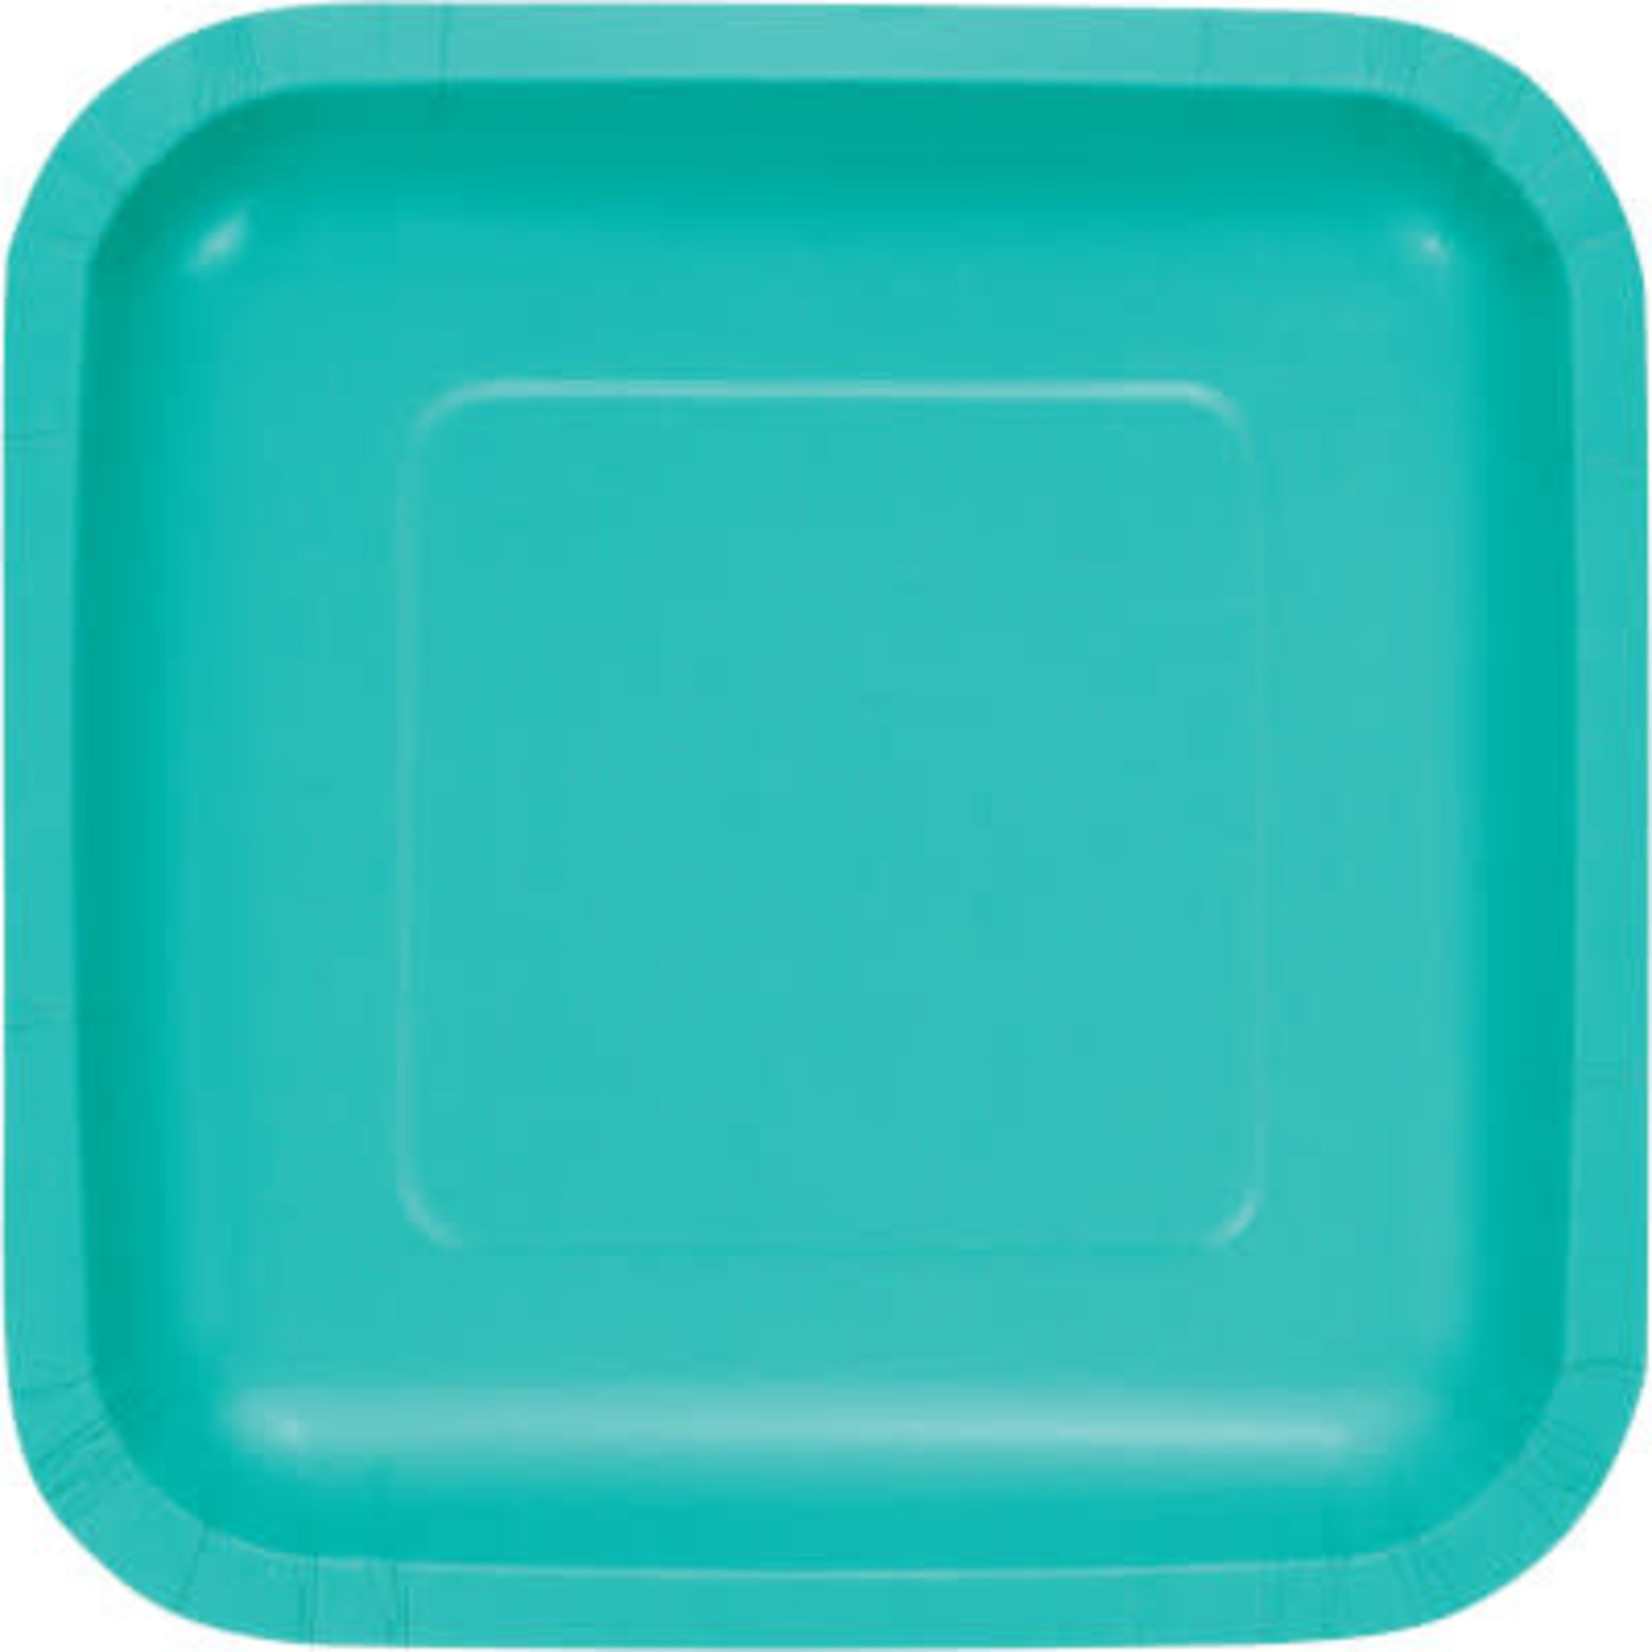 Touch of Color 7" Teal Lagoon Square Paper Plates - 18ct.